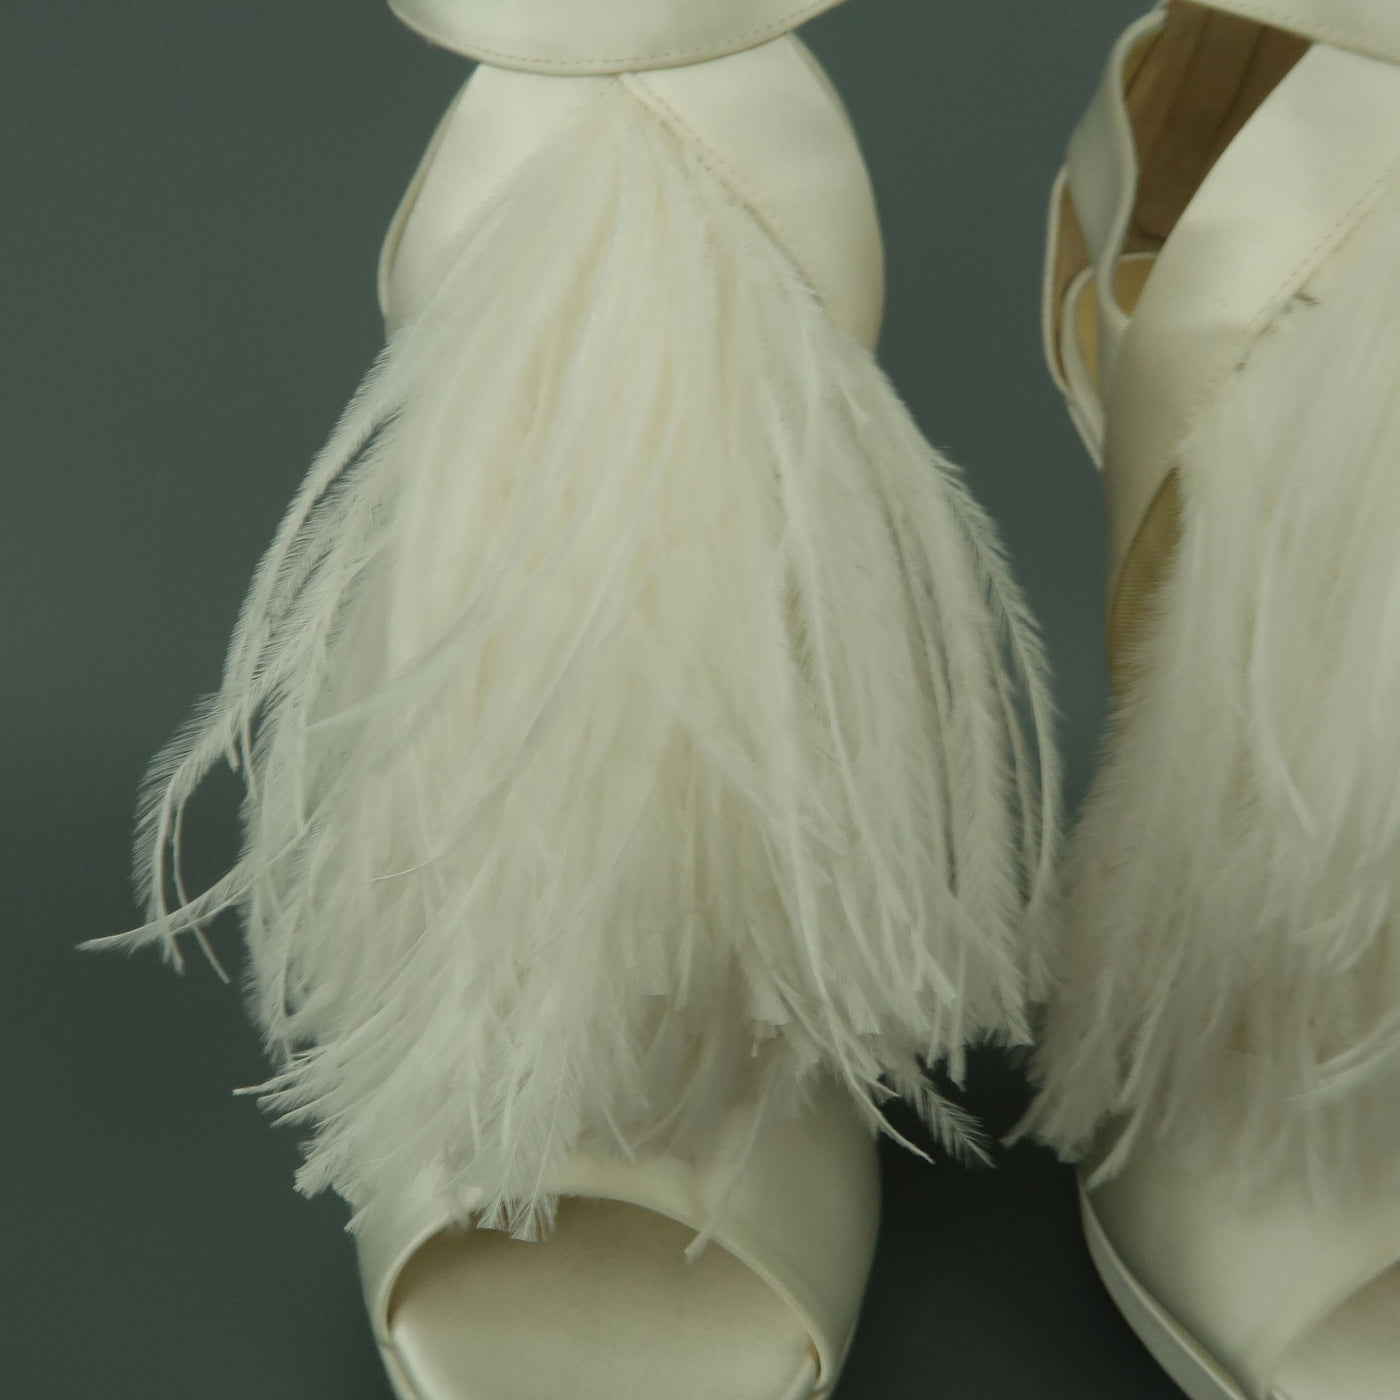 JIMMY CHOO US 8.5 / IT 38.5 White Silk / Leather Ostrich Feather Bridal Sandals